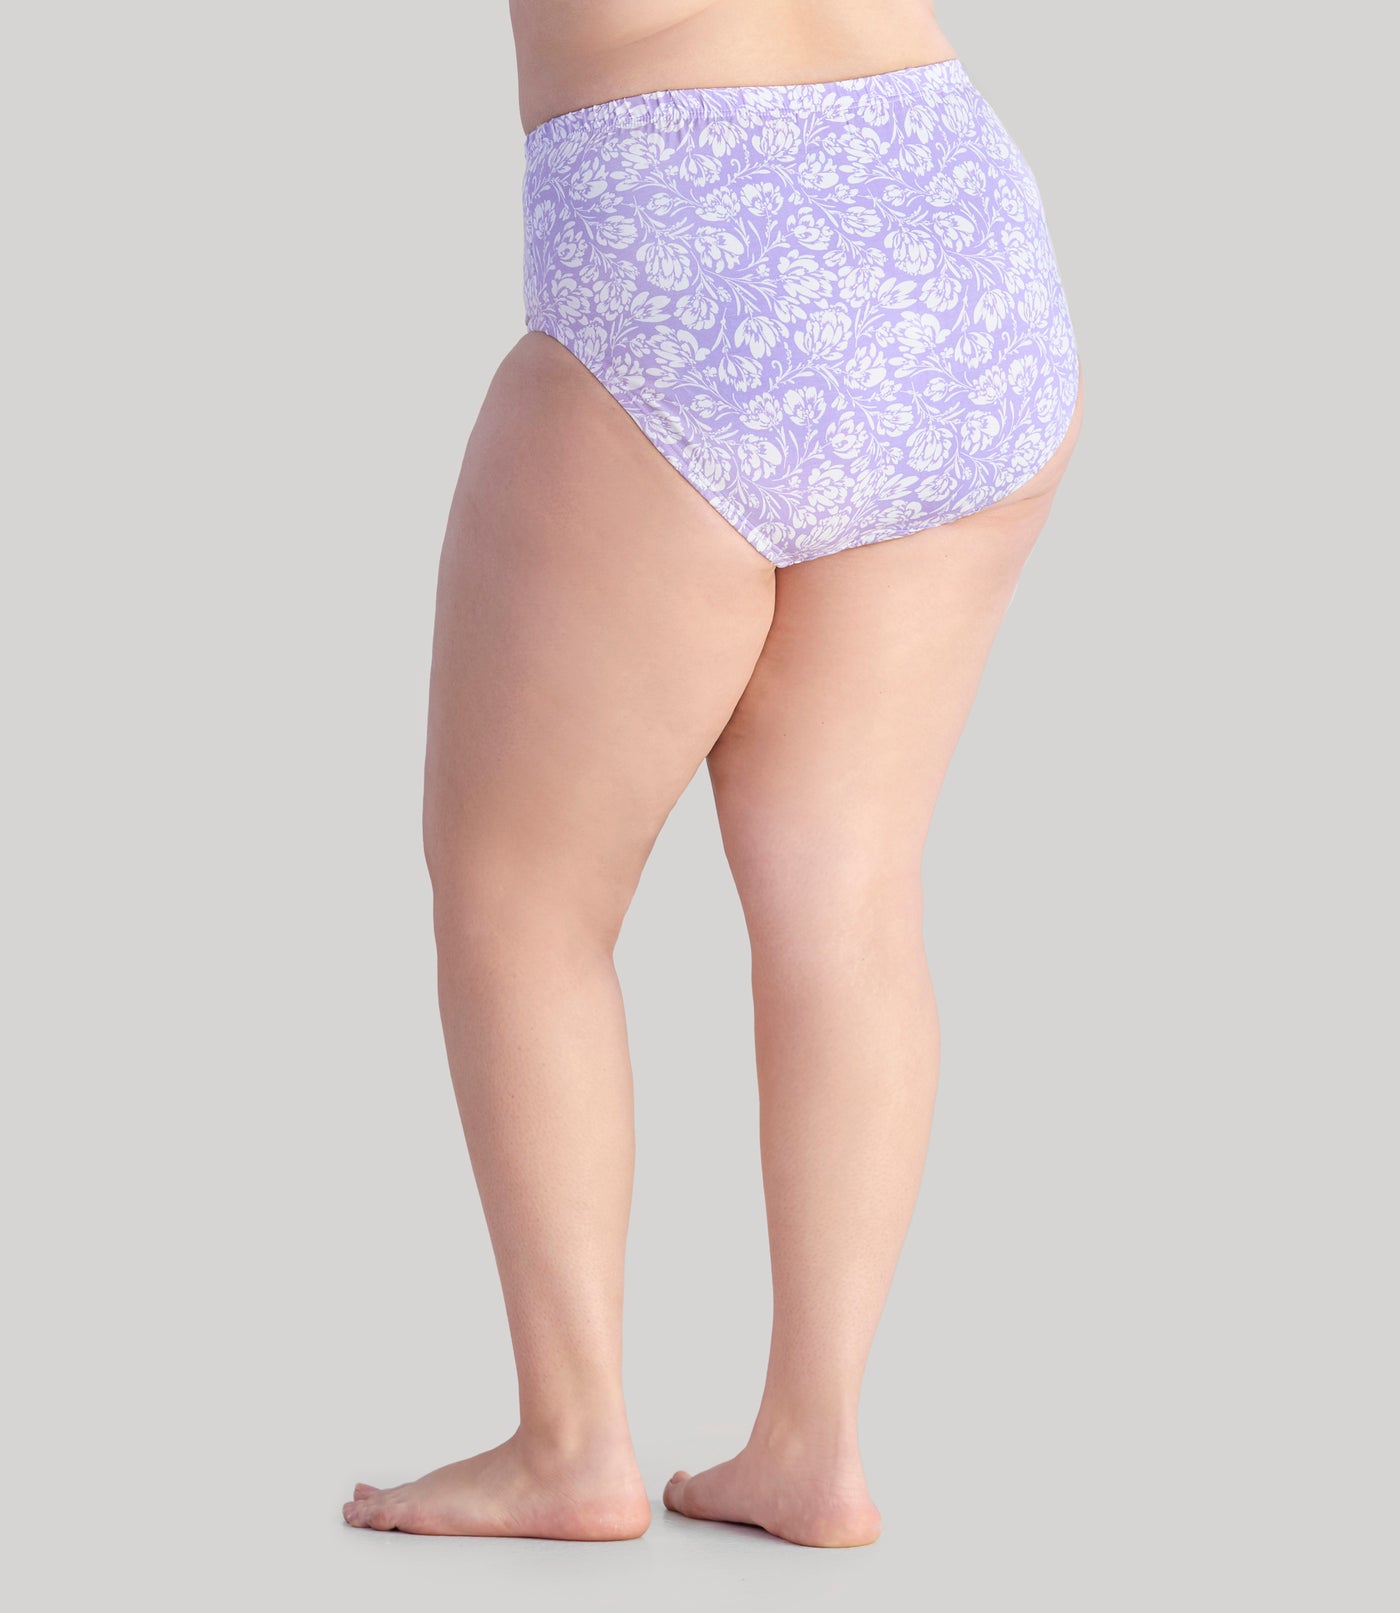 Model, facing back, Junowear Cotton Stretch Classic Brief Flower Prints in color purple and white flowers.